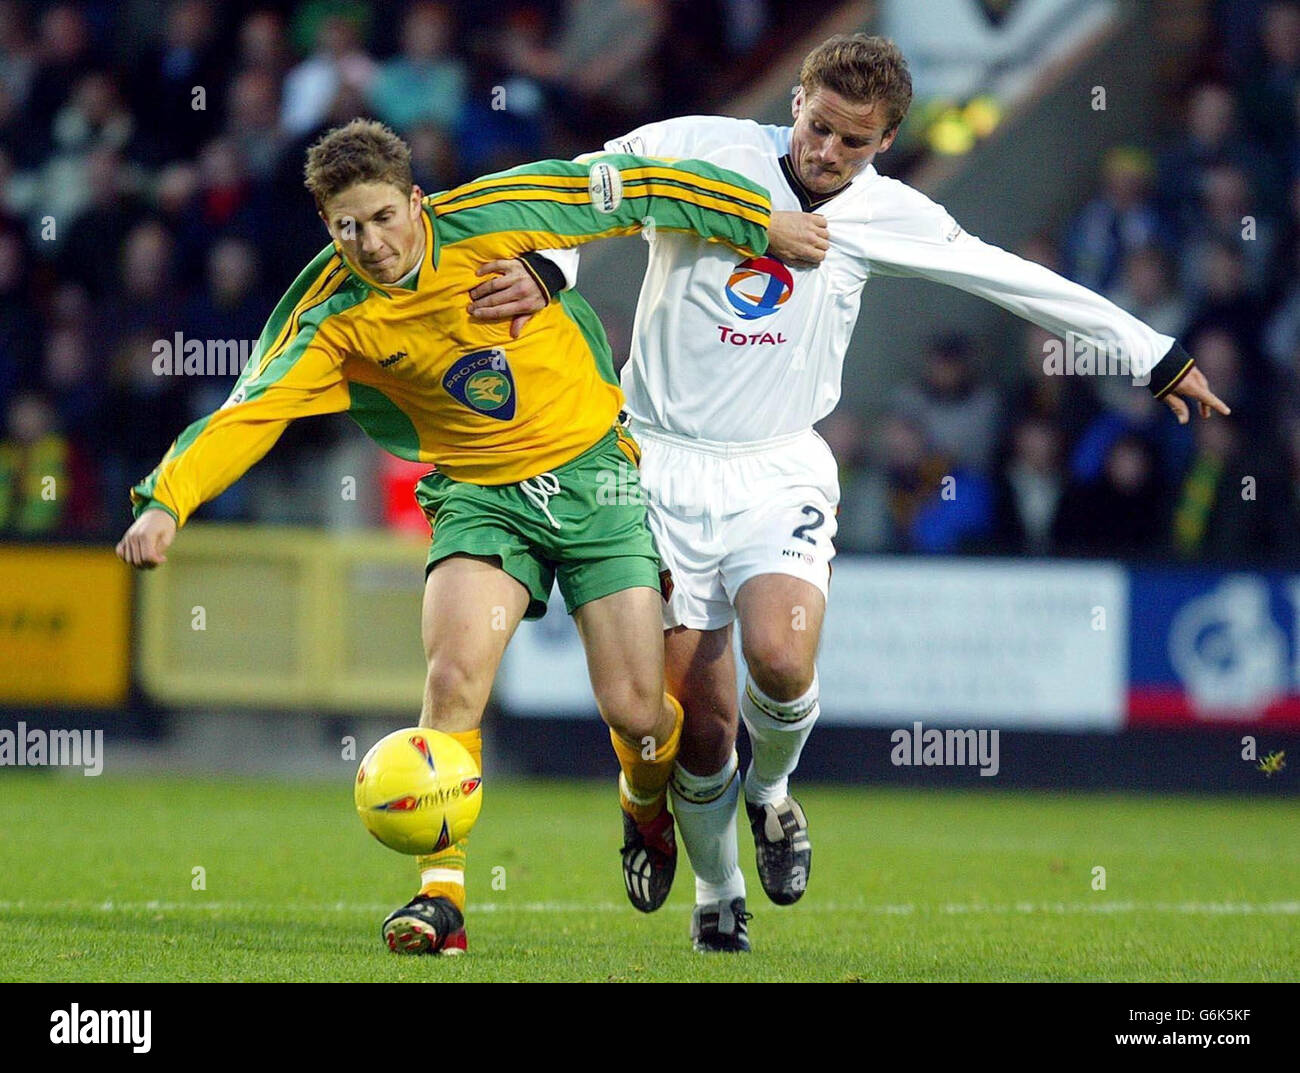 Paul McVeigh of Norwich (left) fights off Watford's Neal Ardley, during the Nationwide Division One match at Carrow Road, Norwich, NO UNOFFICIAL CLUB WEBSITE USE. Stock Photo